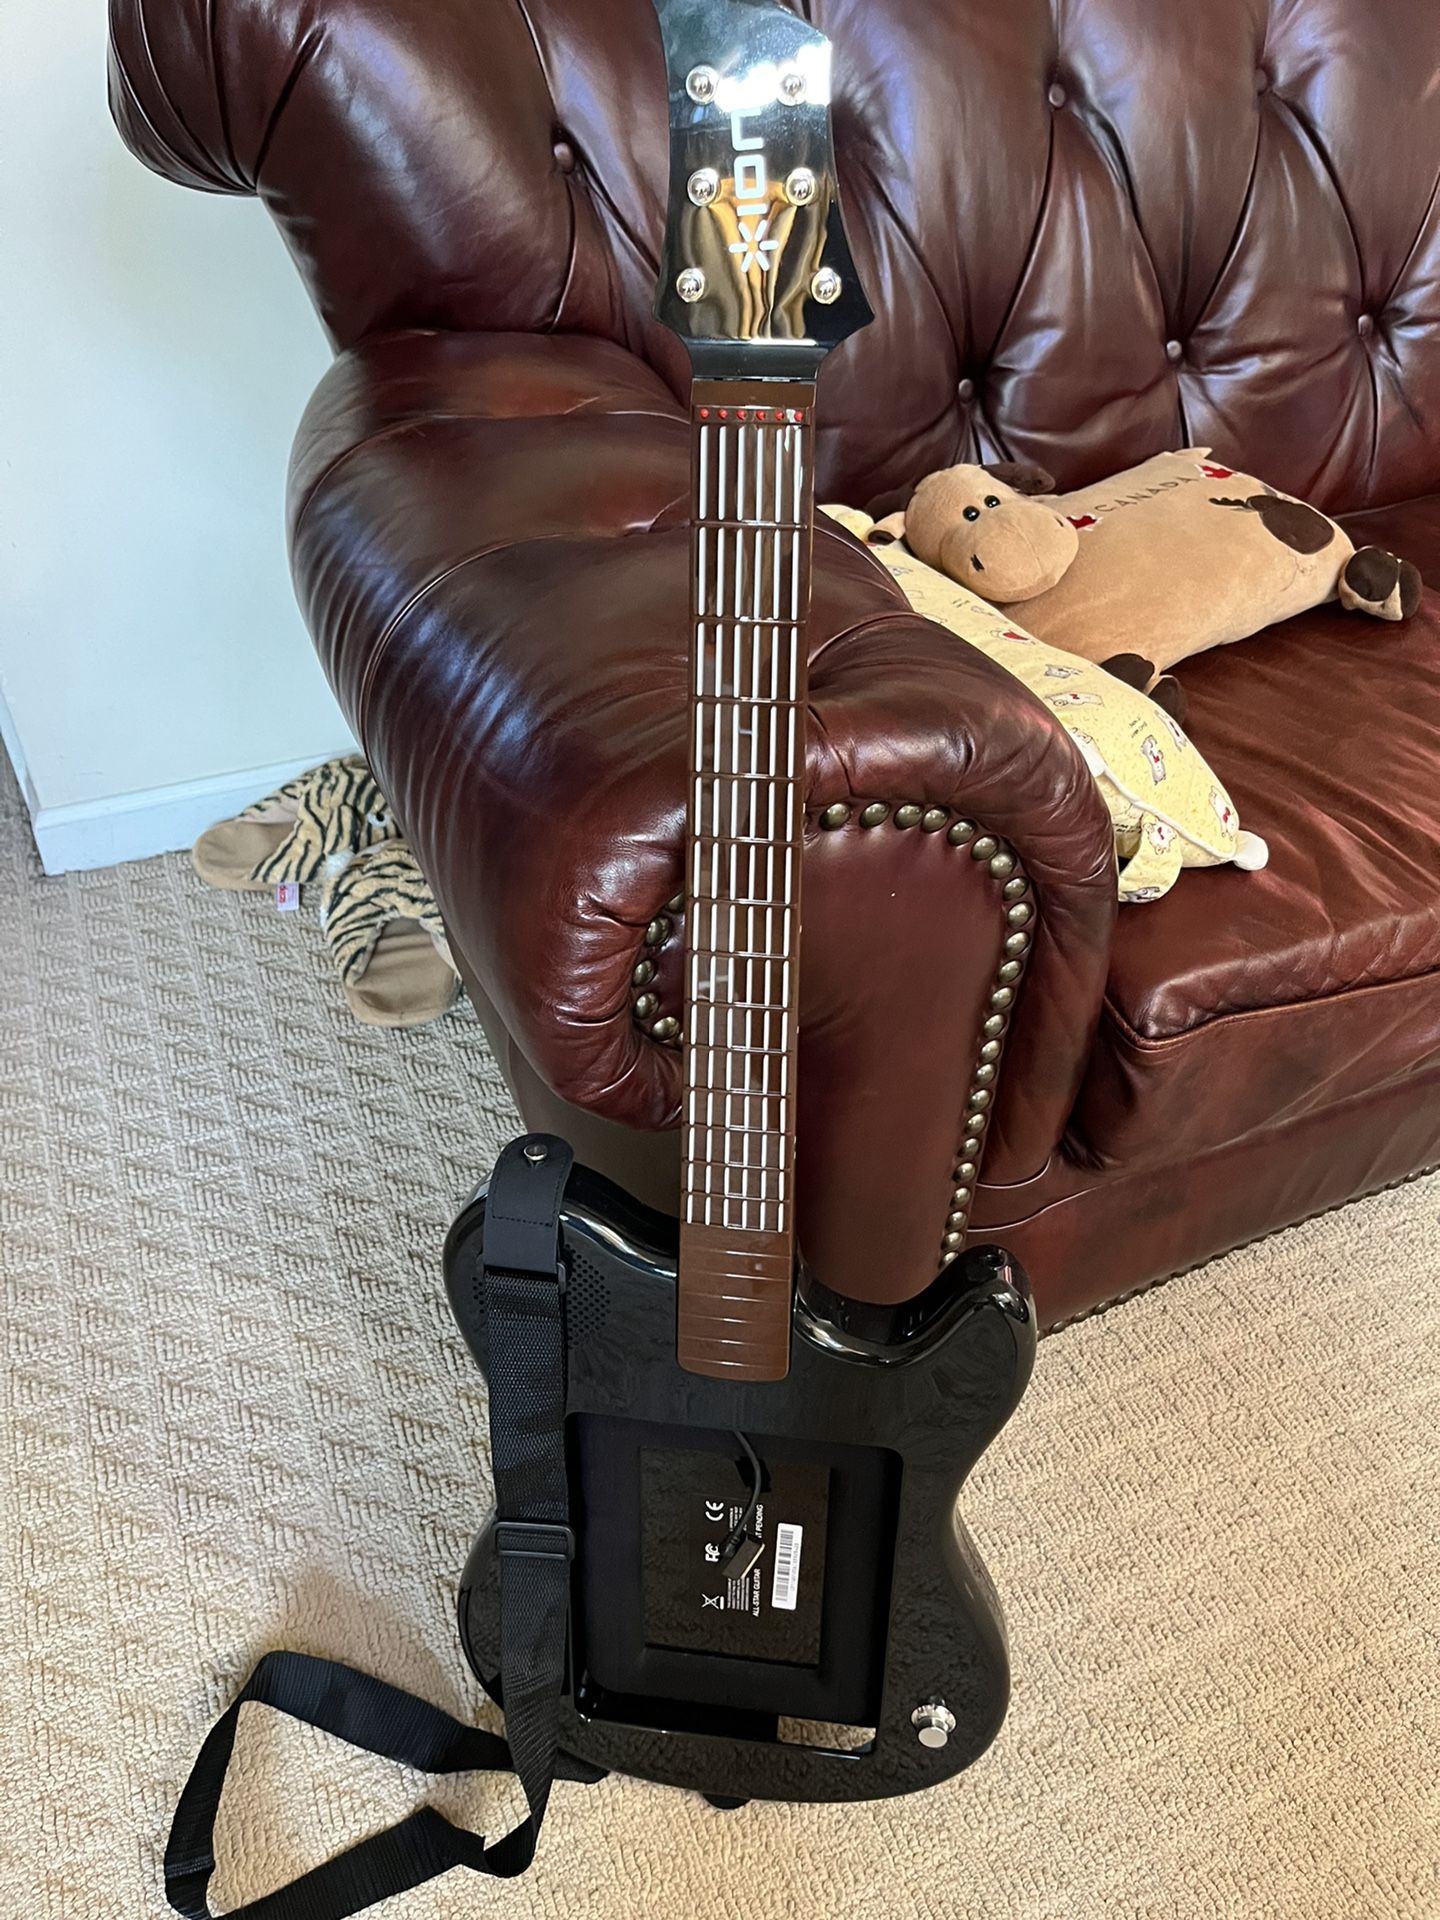 Guitar Toy, Older Ipad Connect To Generate Sounds 